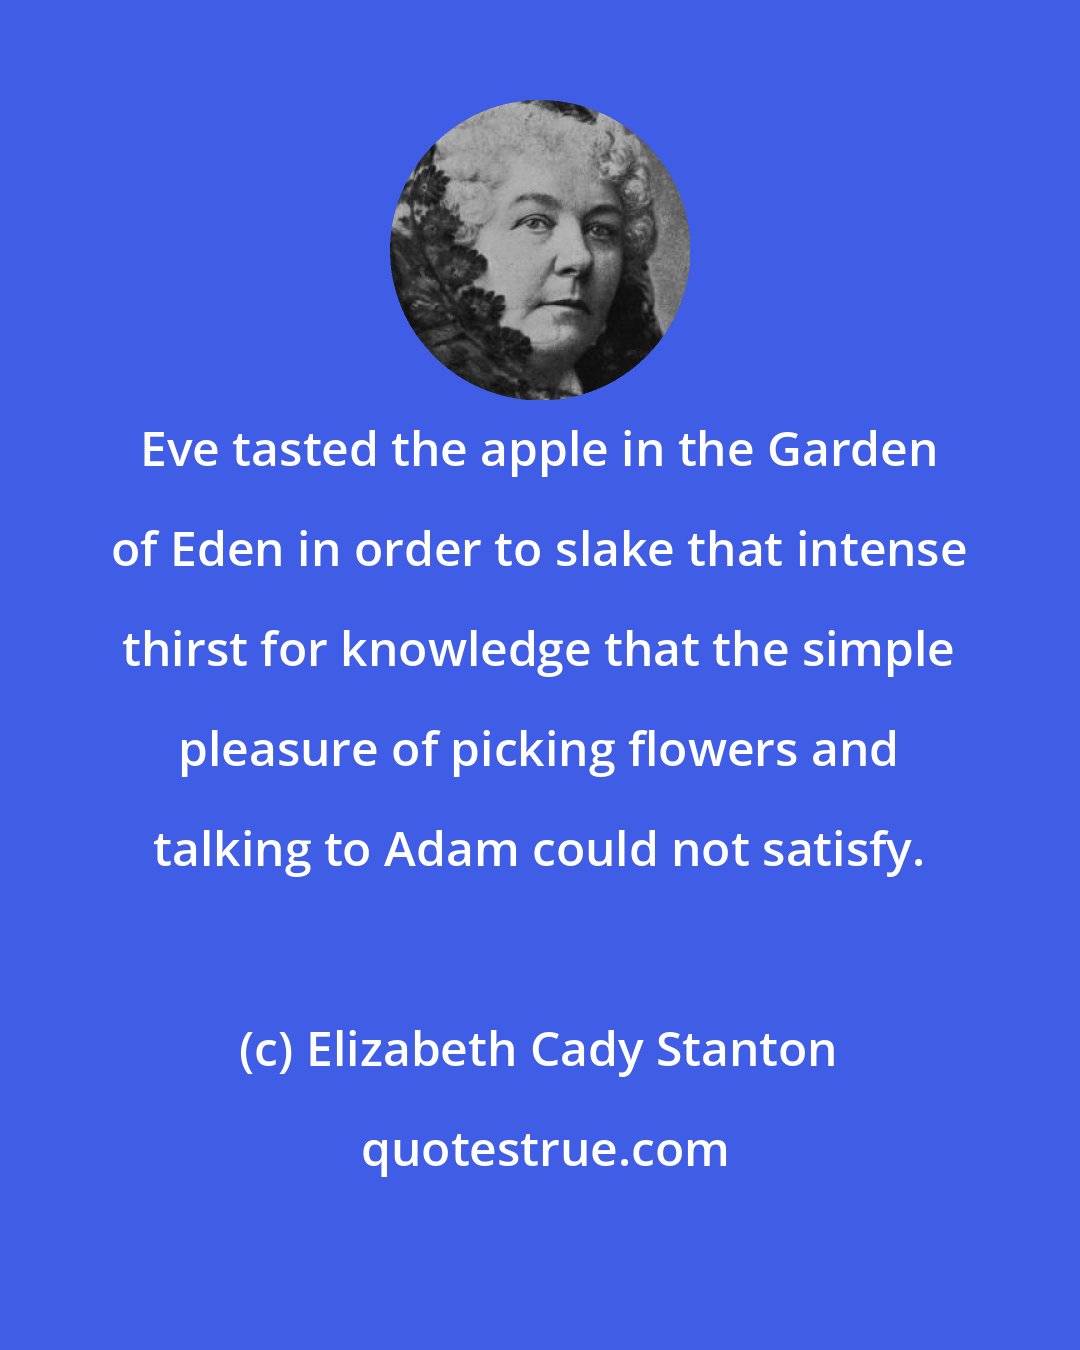 Elizabeth Cady Stanton: Eve tasted the apple in the Garden of Eden in order to slake that intense thirst for knowledge that the simple pleasure of picking flowers and talking to Adam could not satisfy.